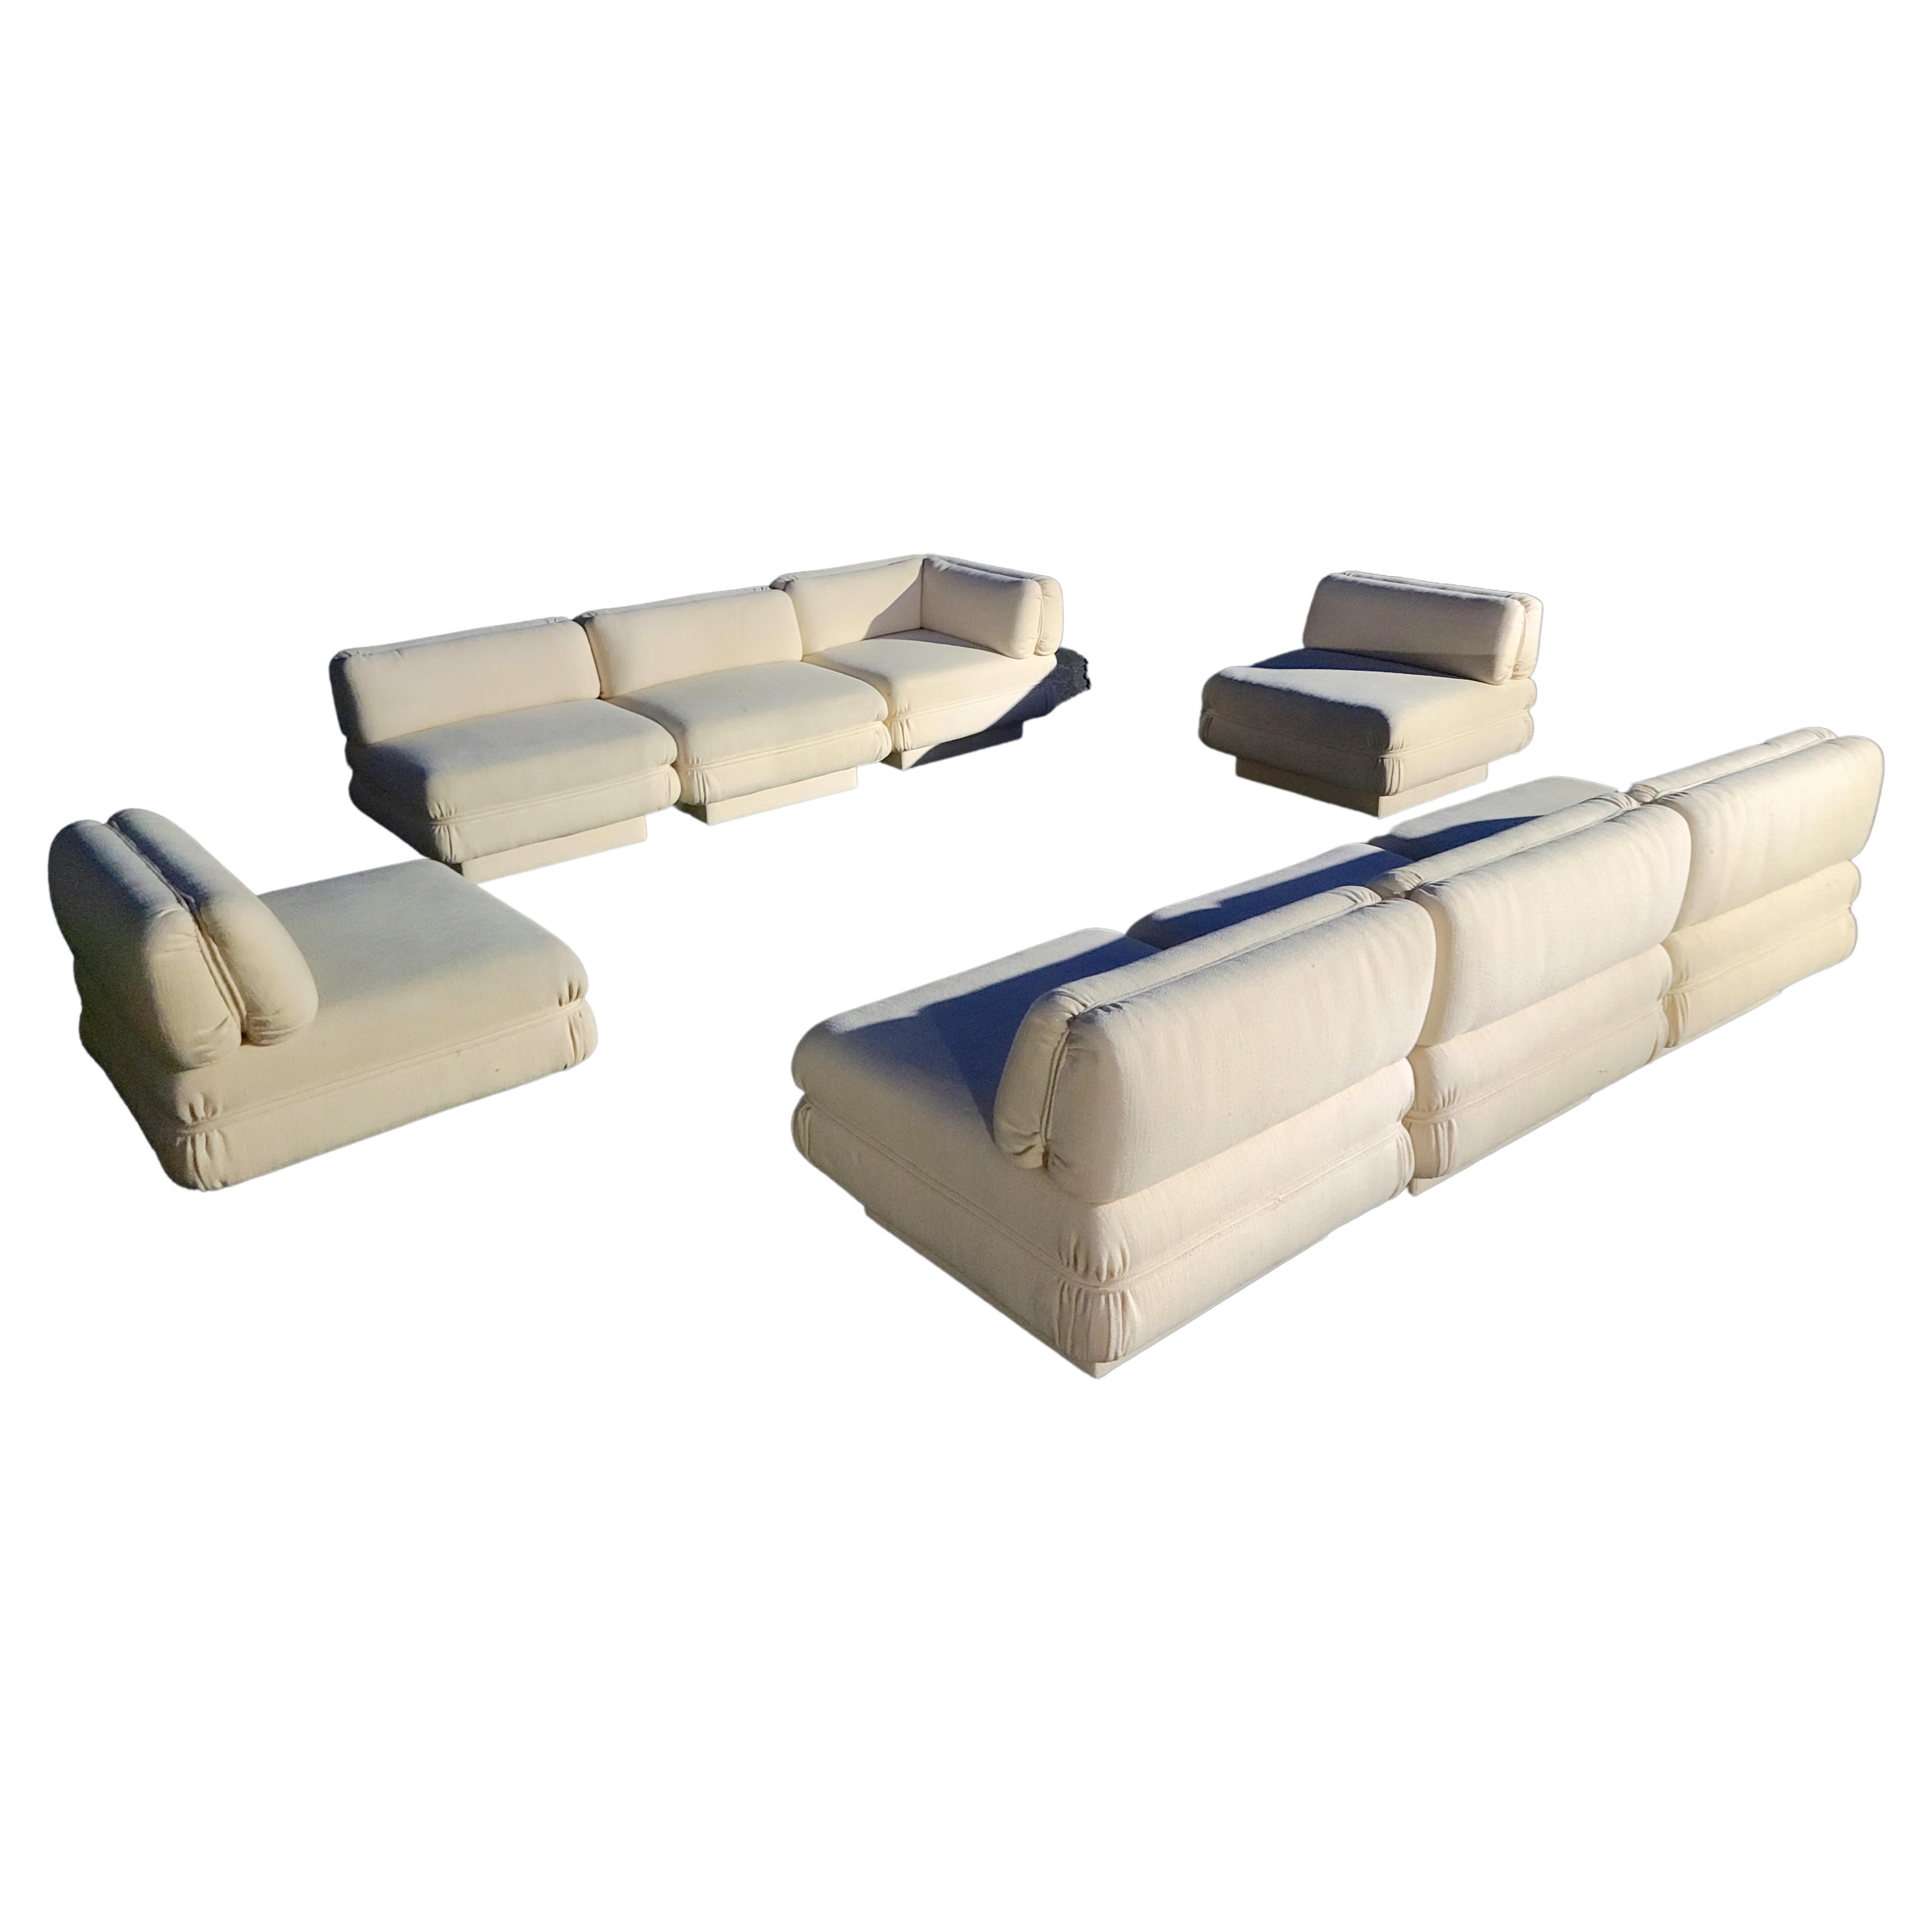 Harvey Probber 8 Piece Sectional Sofa For Sale 7